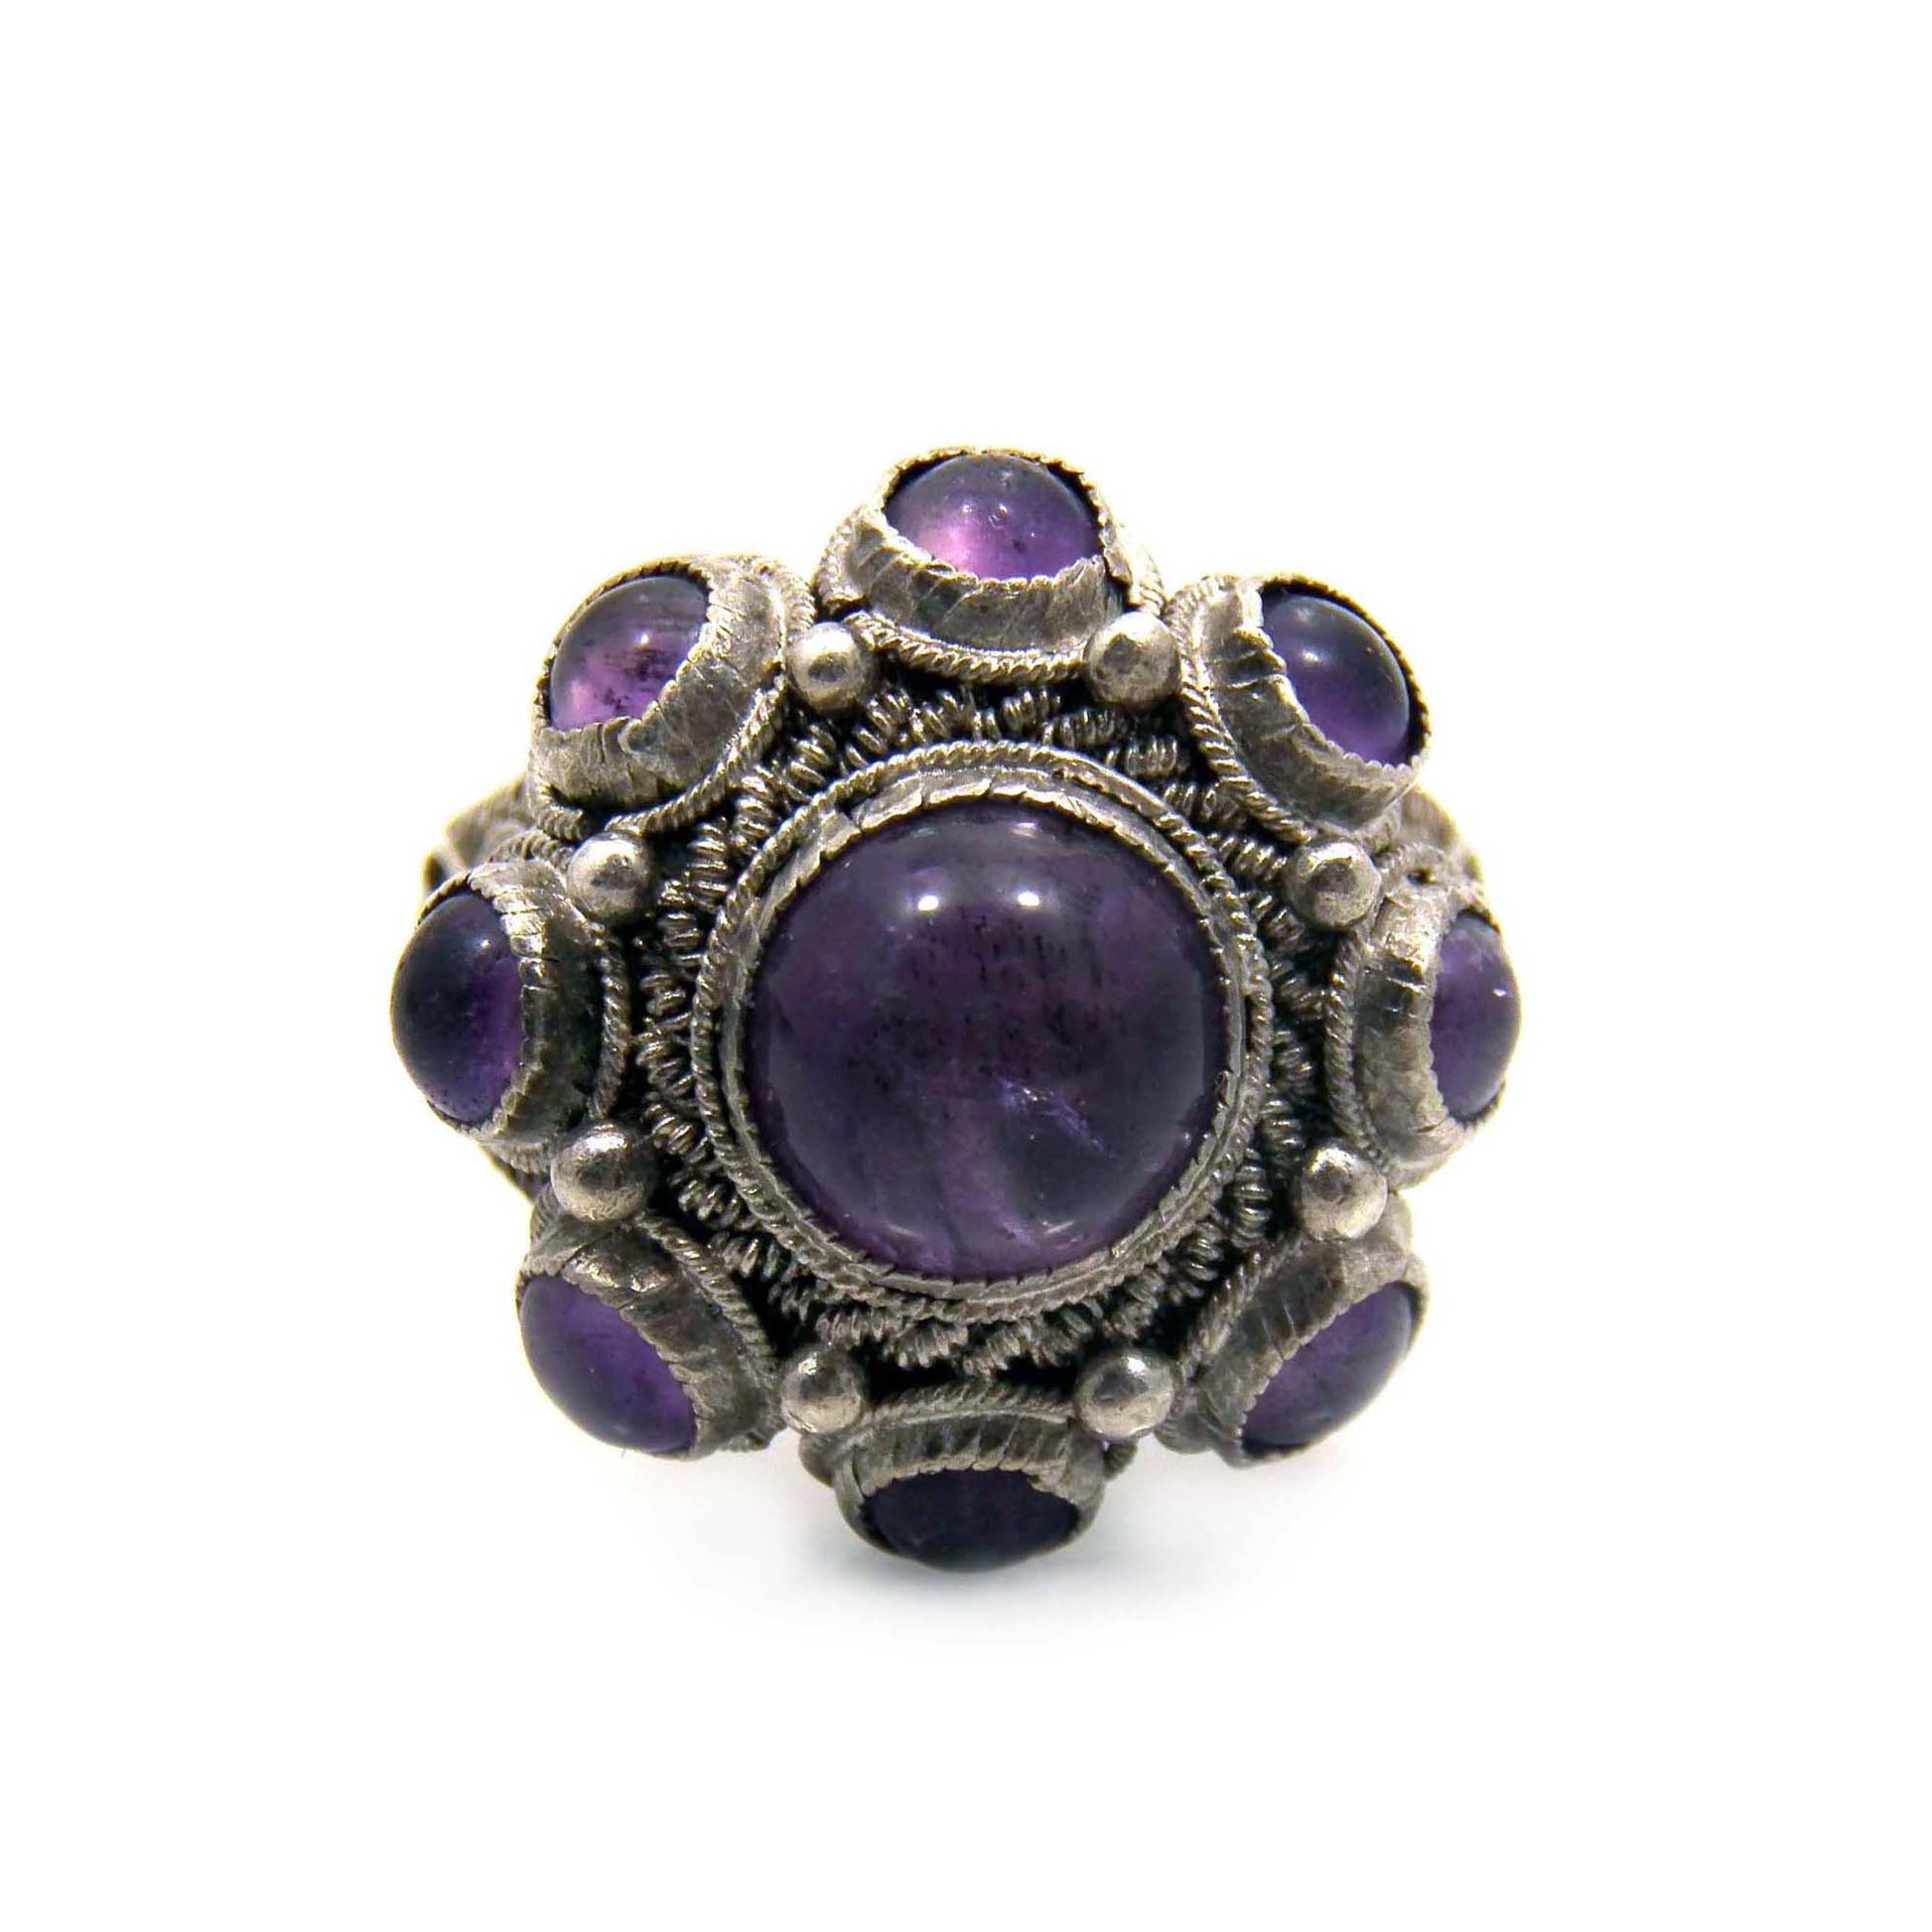 Chinese export ring is set with a natural amethyst cabochons